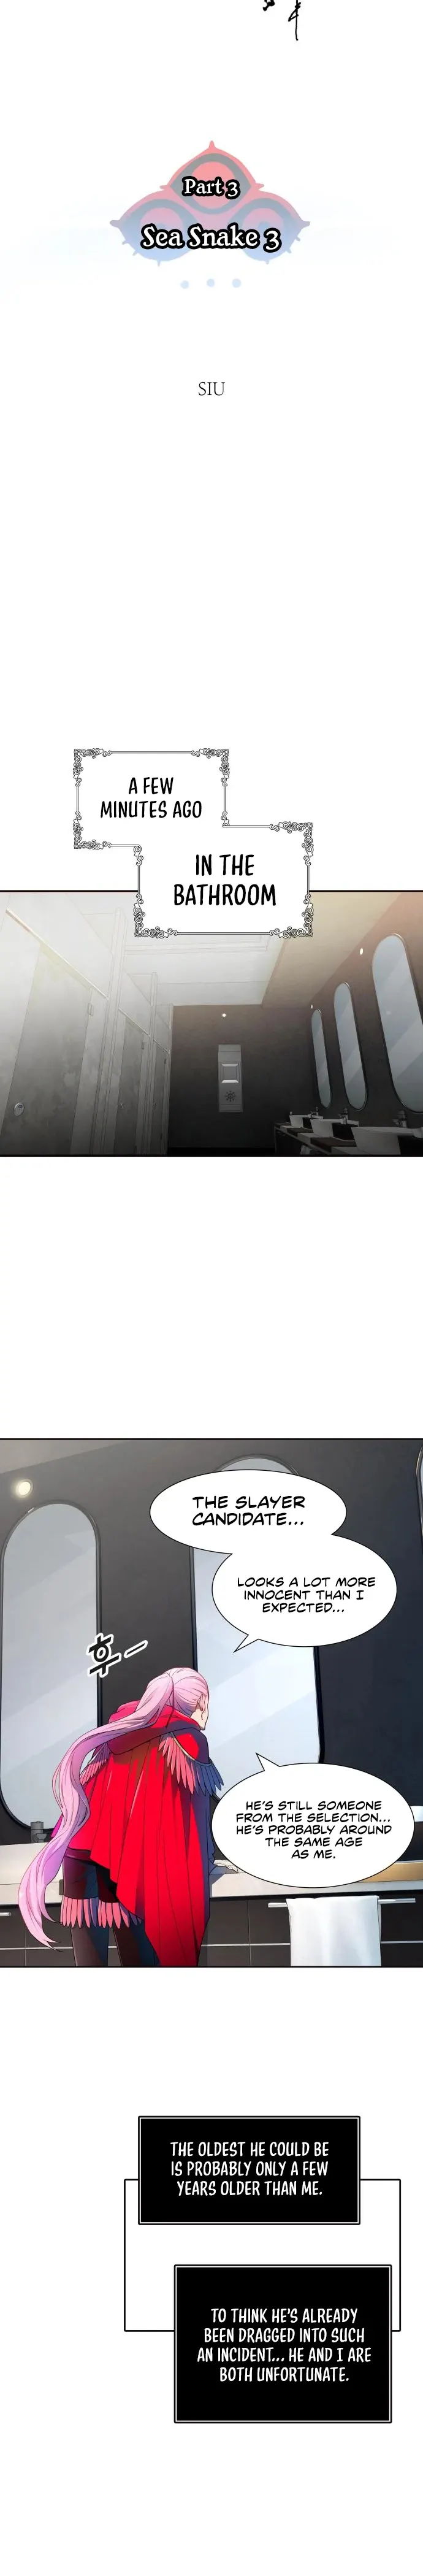 Tower Of God Chapter 558 Read Tower Of God Chapter 558 - Manganelo